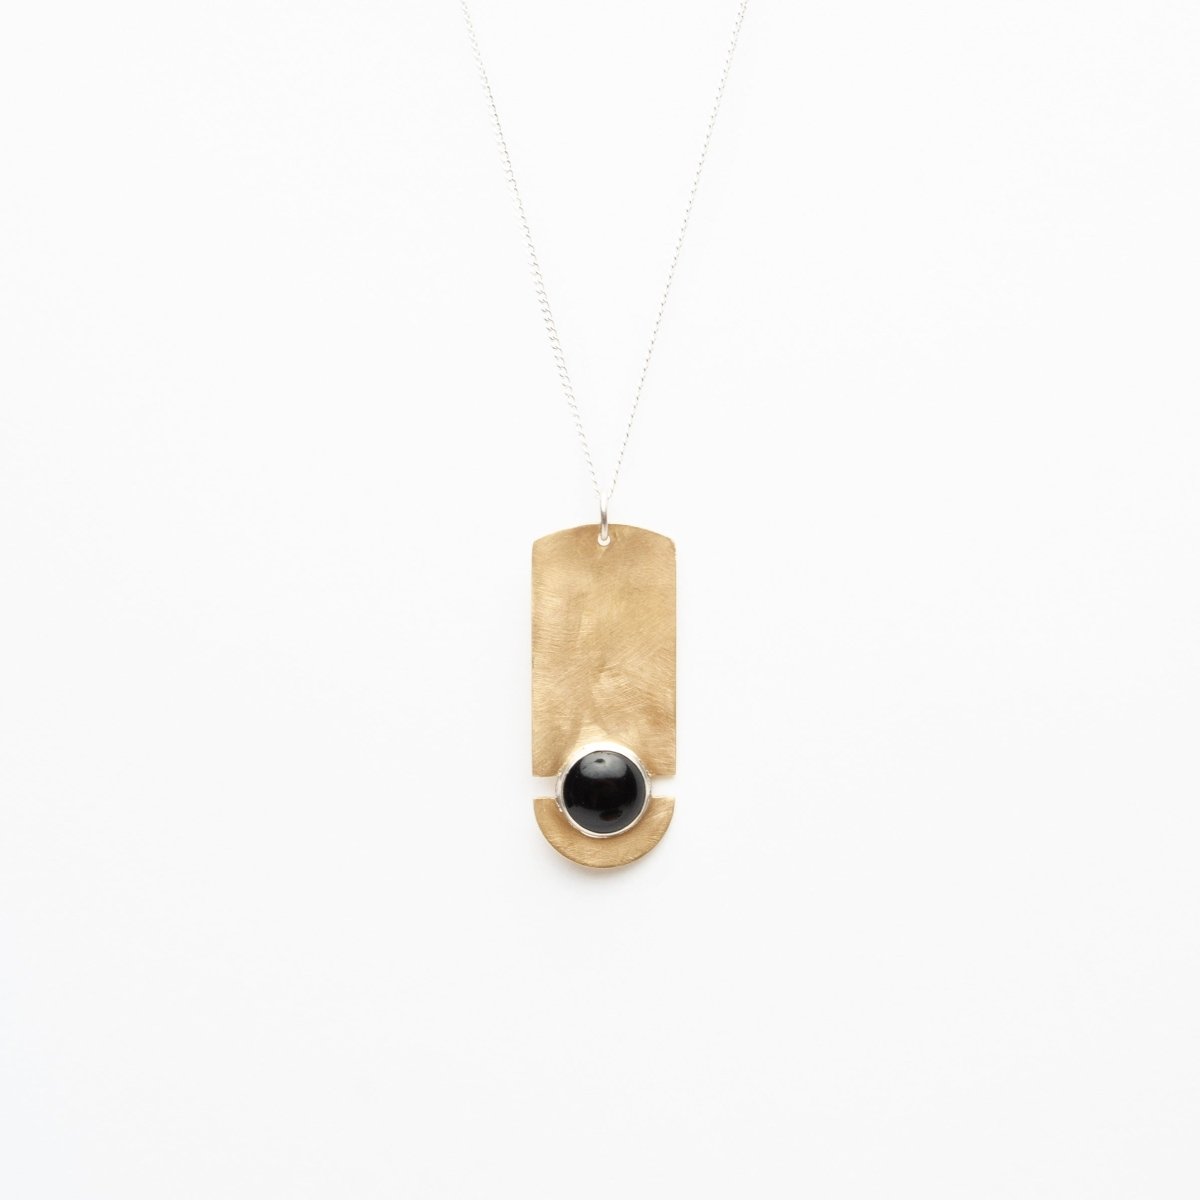 Elongated pendant necklace made of brass with a Black Onyx stone set between two slits and a rounded bottom edge.  Pendant hangs from a sterling silver chain. Designed by Kari Phillips in Portland, Oregon.